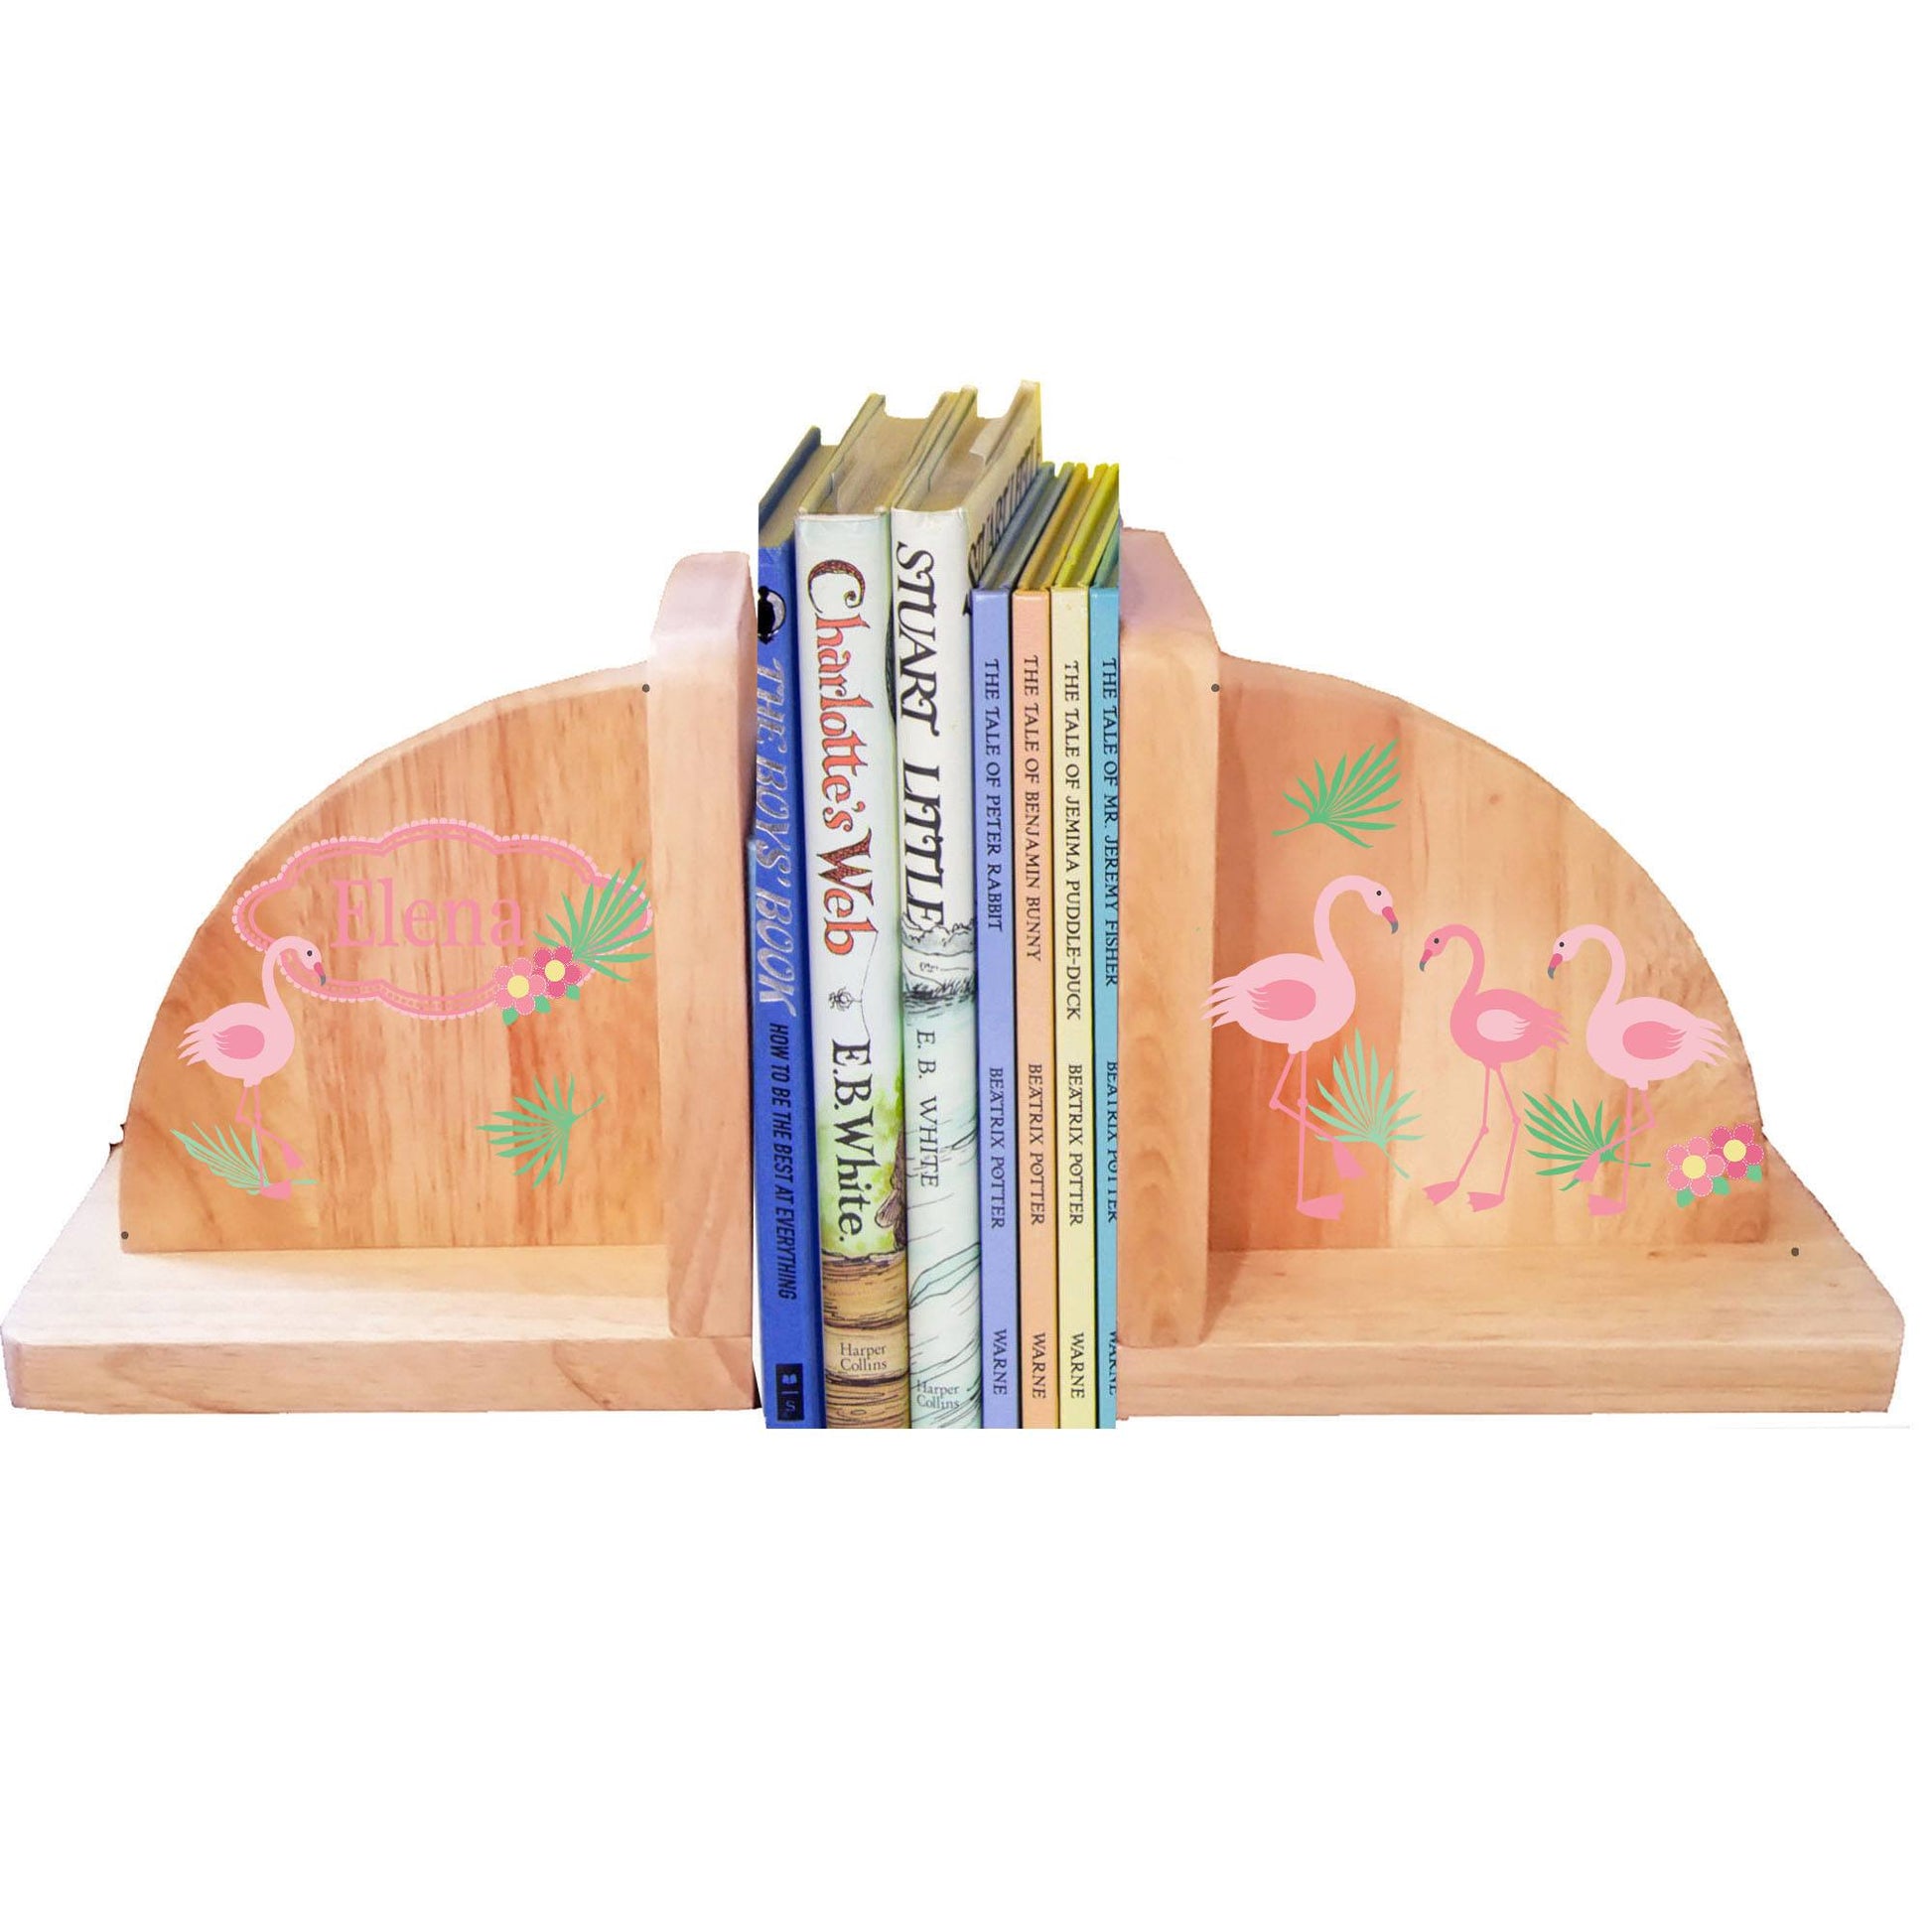 Personalized Natural Wooden Bookends with Palm Flamingo design